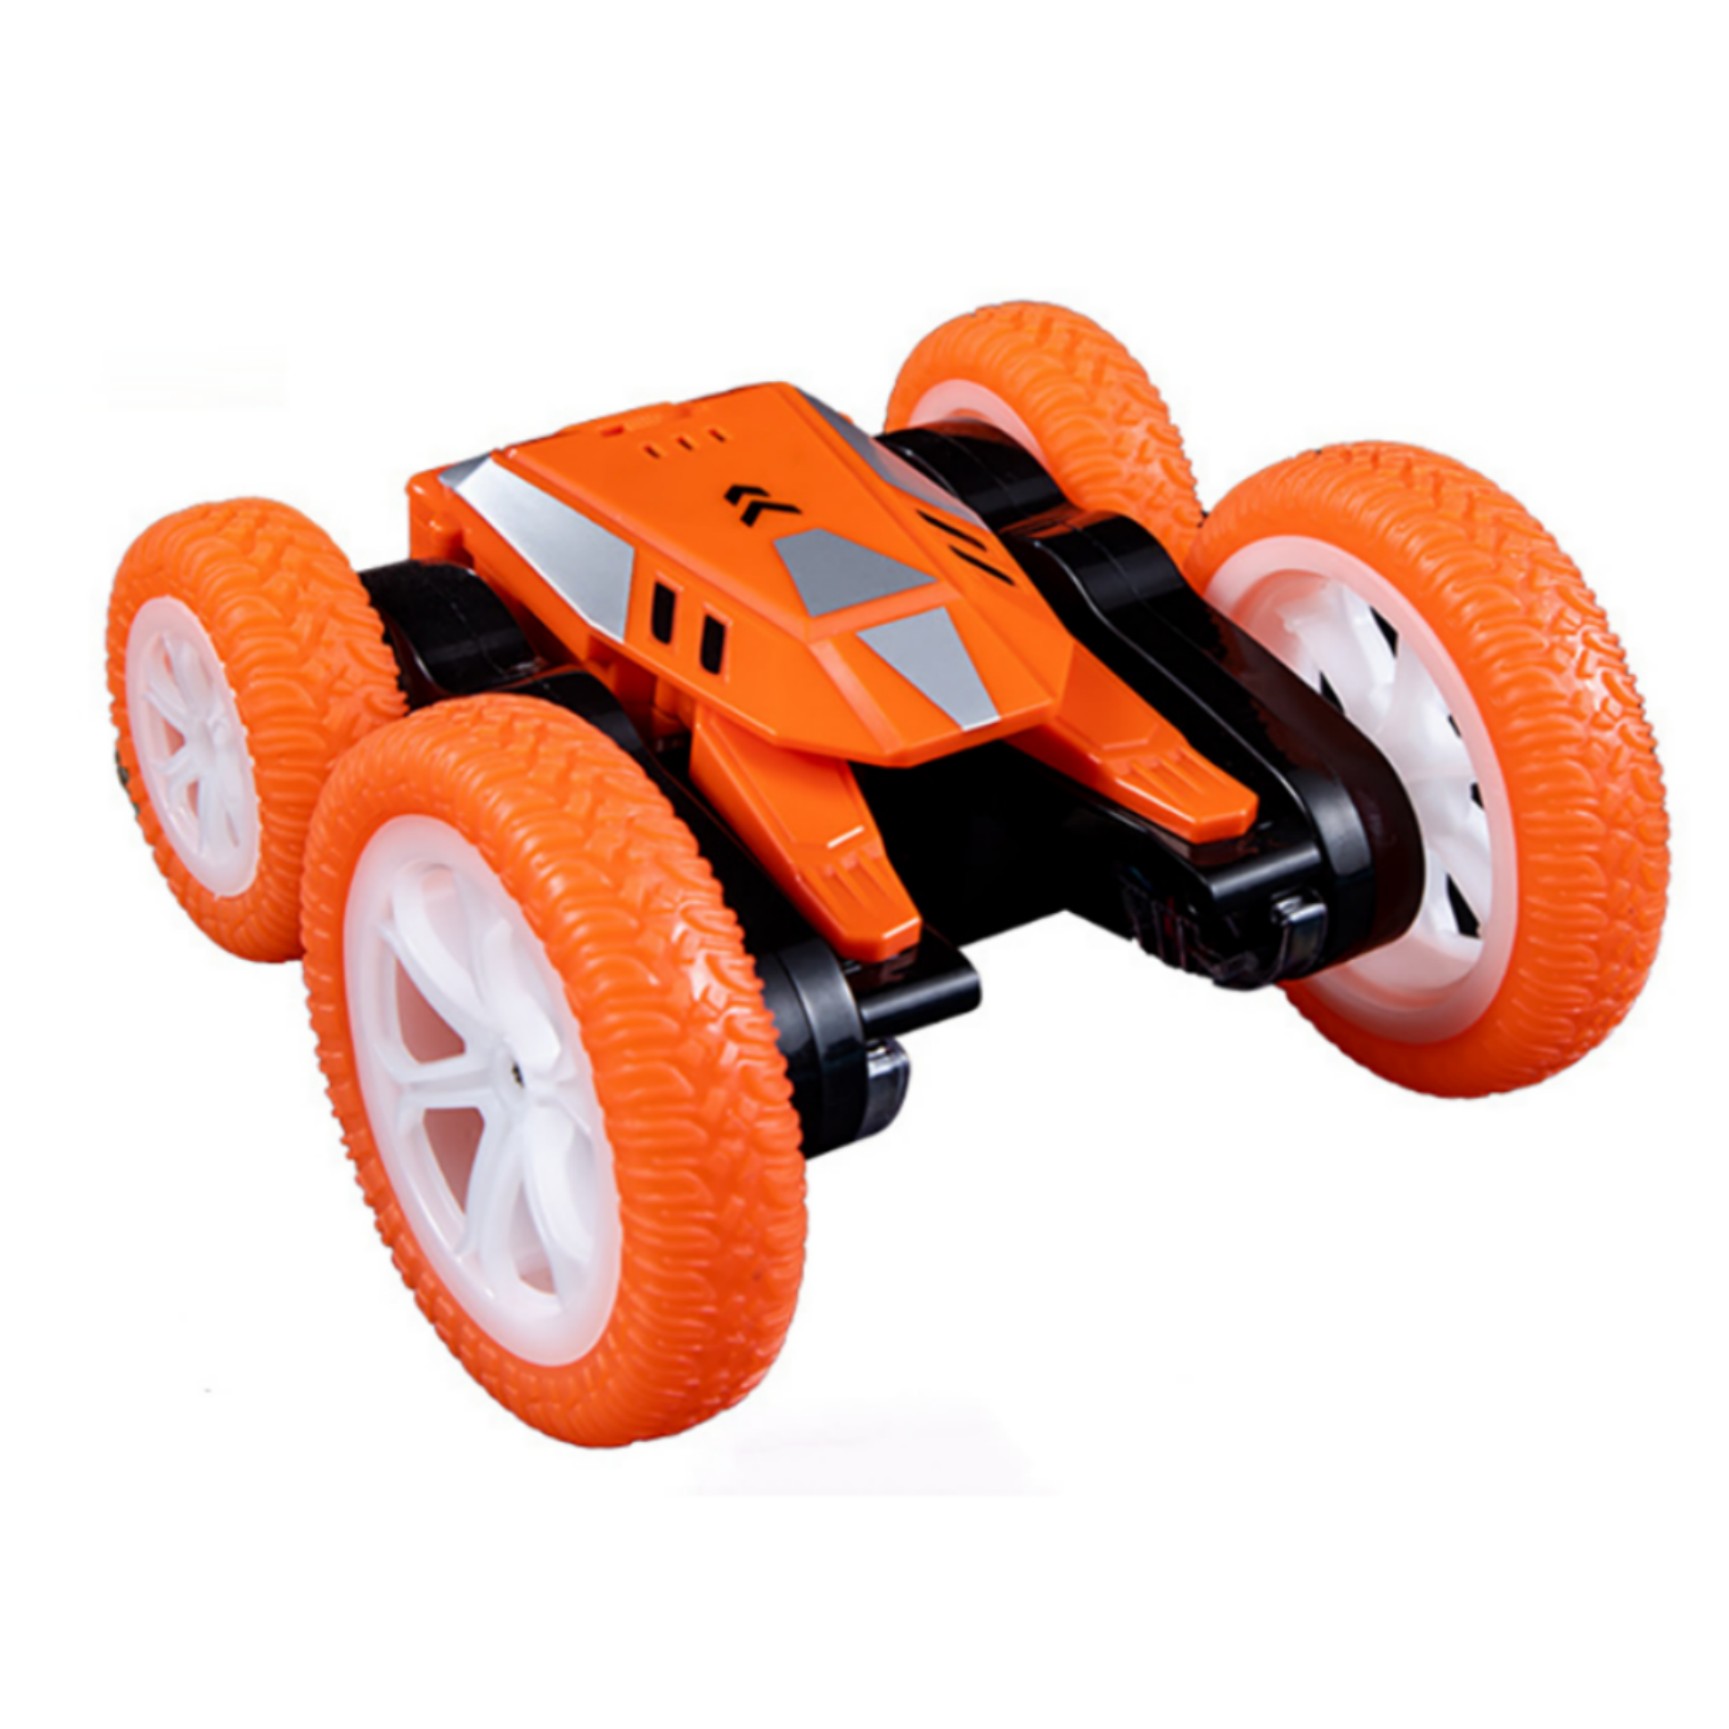 2.4g Remote Control Stunt Car 4-channel Double-sided Butterfly Rotating Rc Car With Light For Children Birthday Gifts